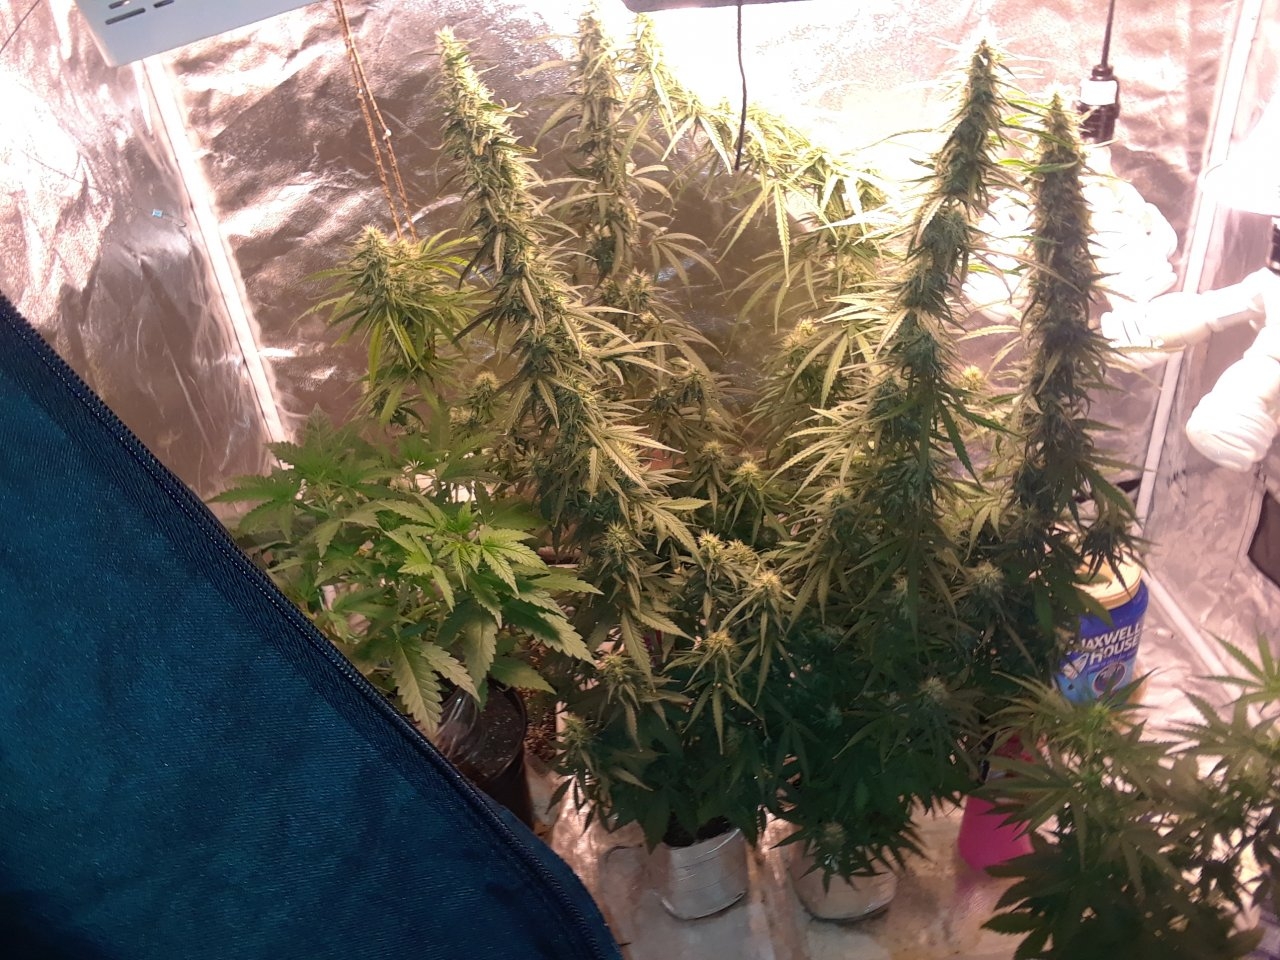 Colas are swelling up